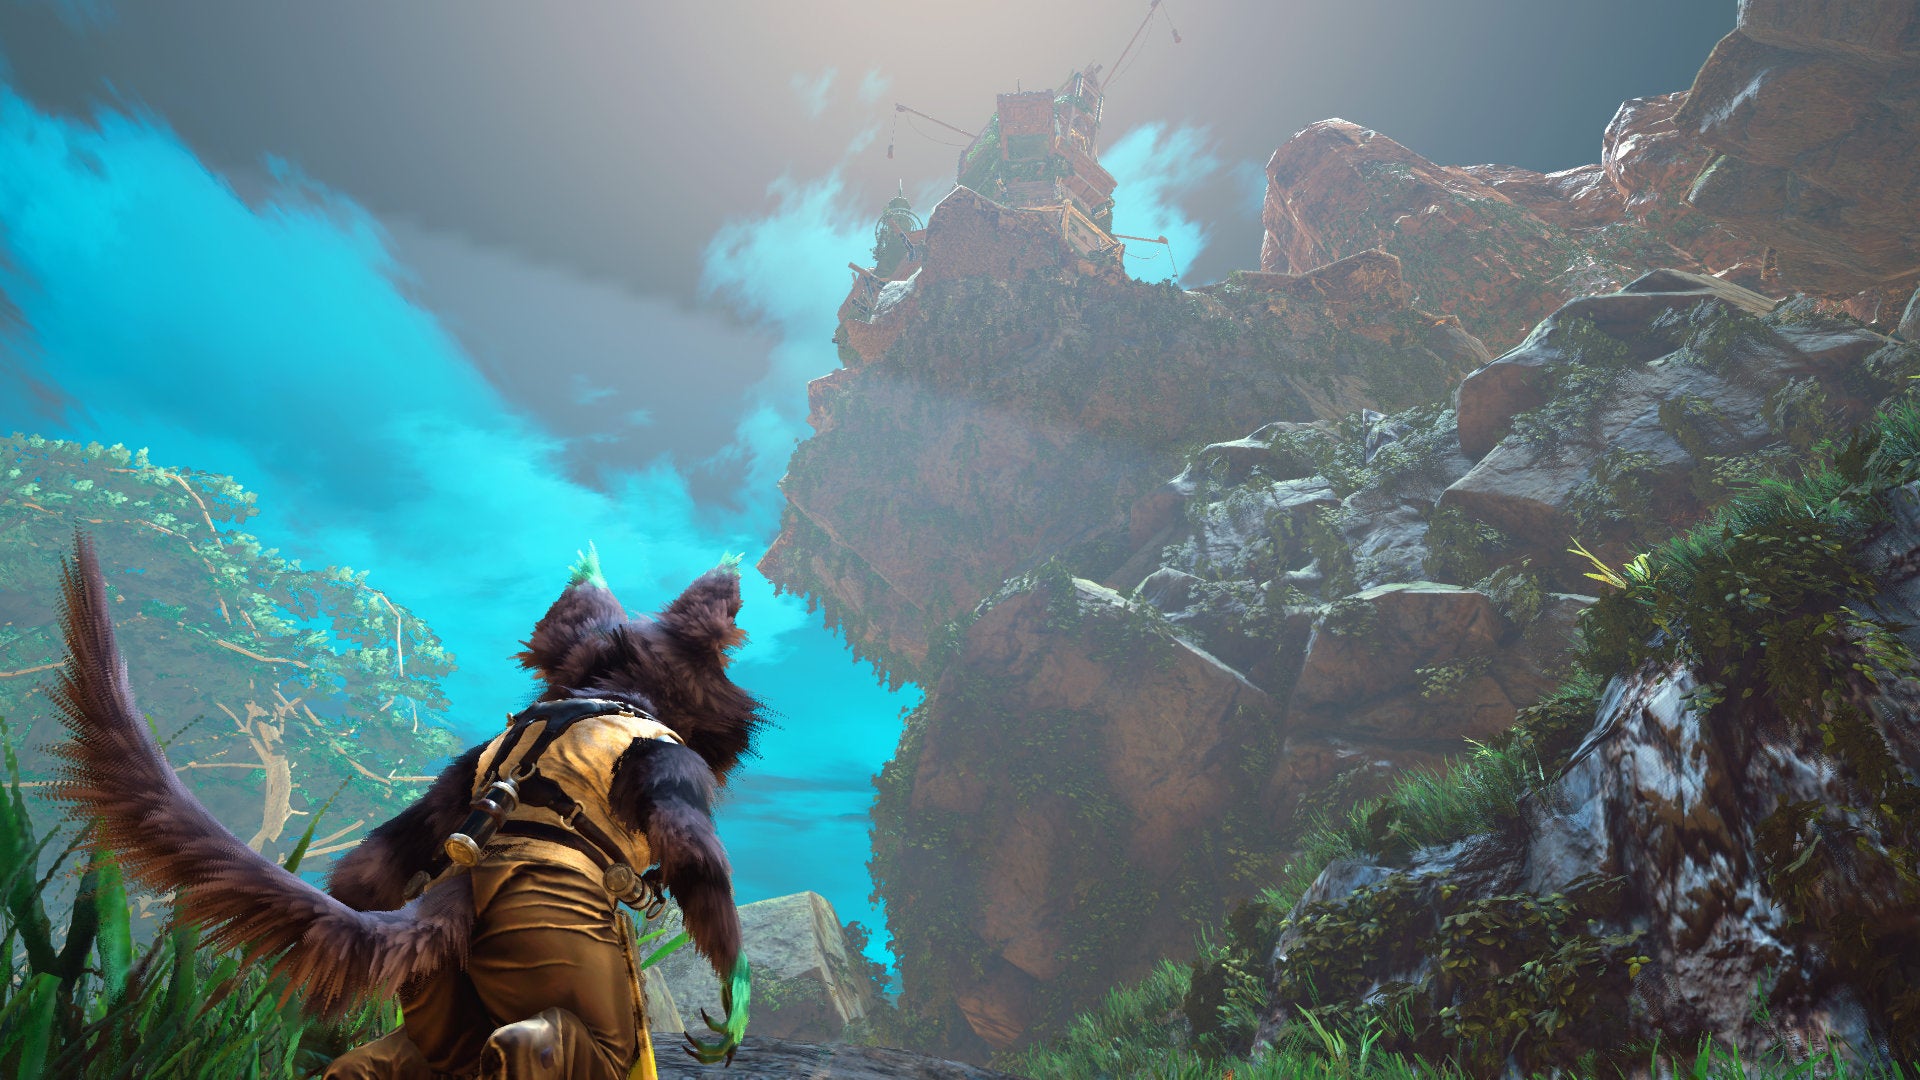 A Biomutant screenshot of the main character looking up at a tall structure atop a mountain.